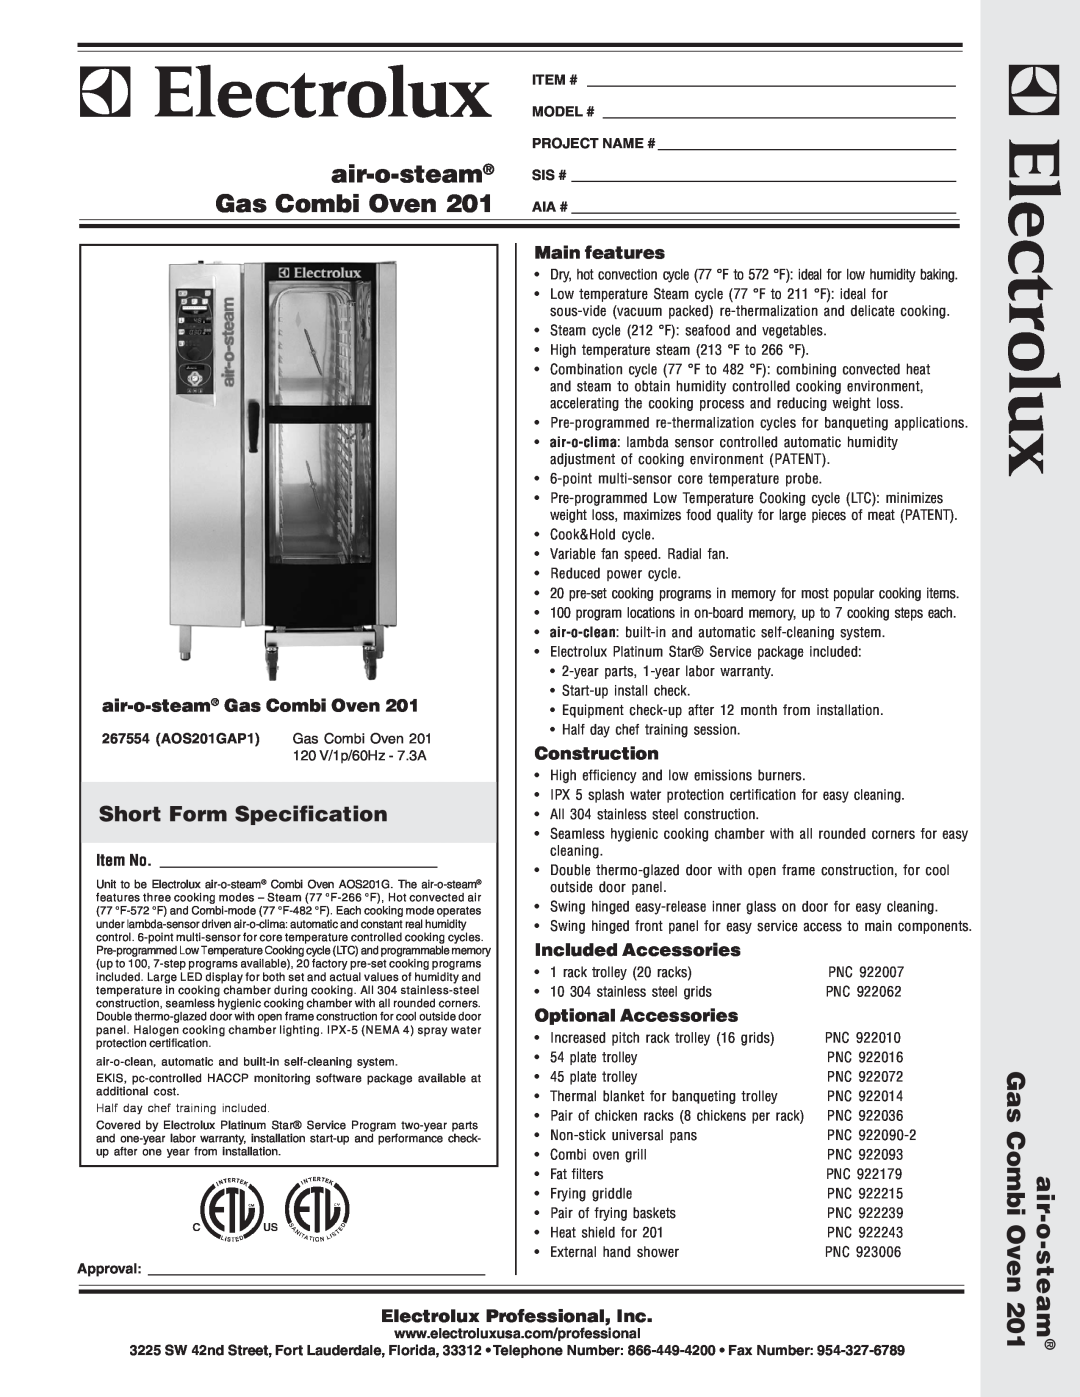 Electrolux AOS201GAP1 warranty Short Form Specification, Main features, air-o-steam Gas Combi Oven, Construction, Item # 